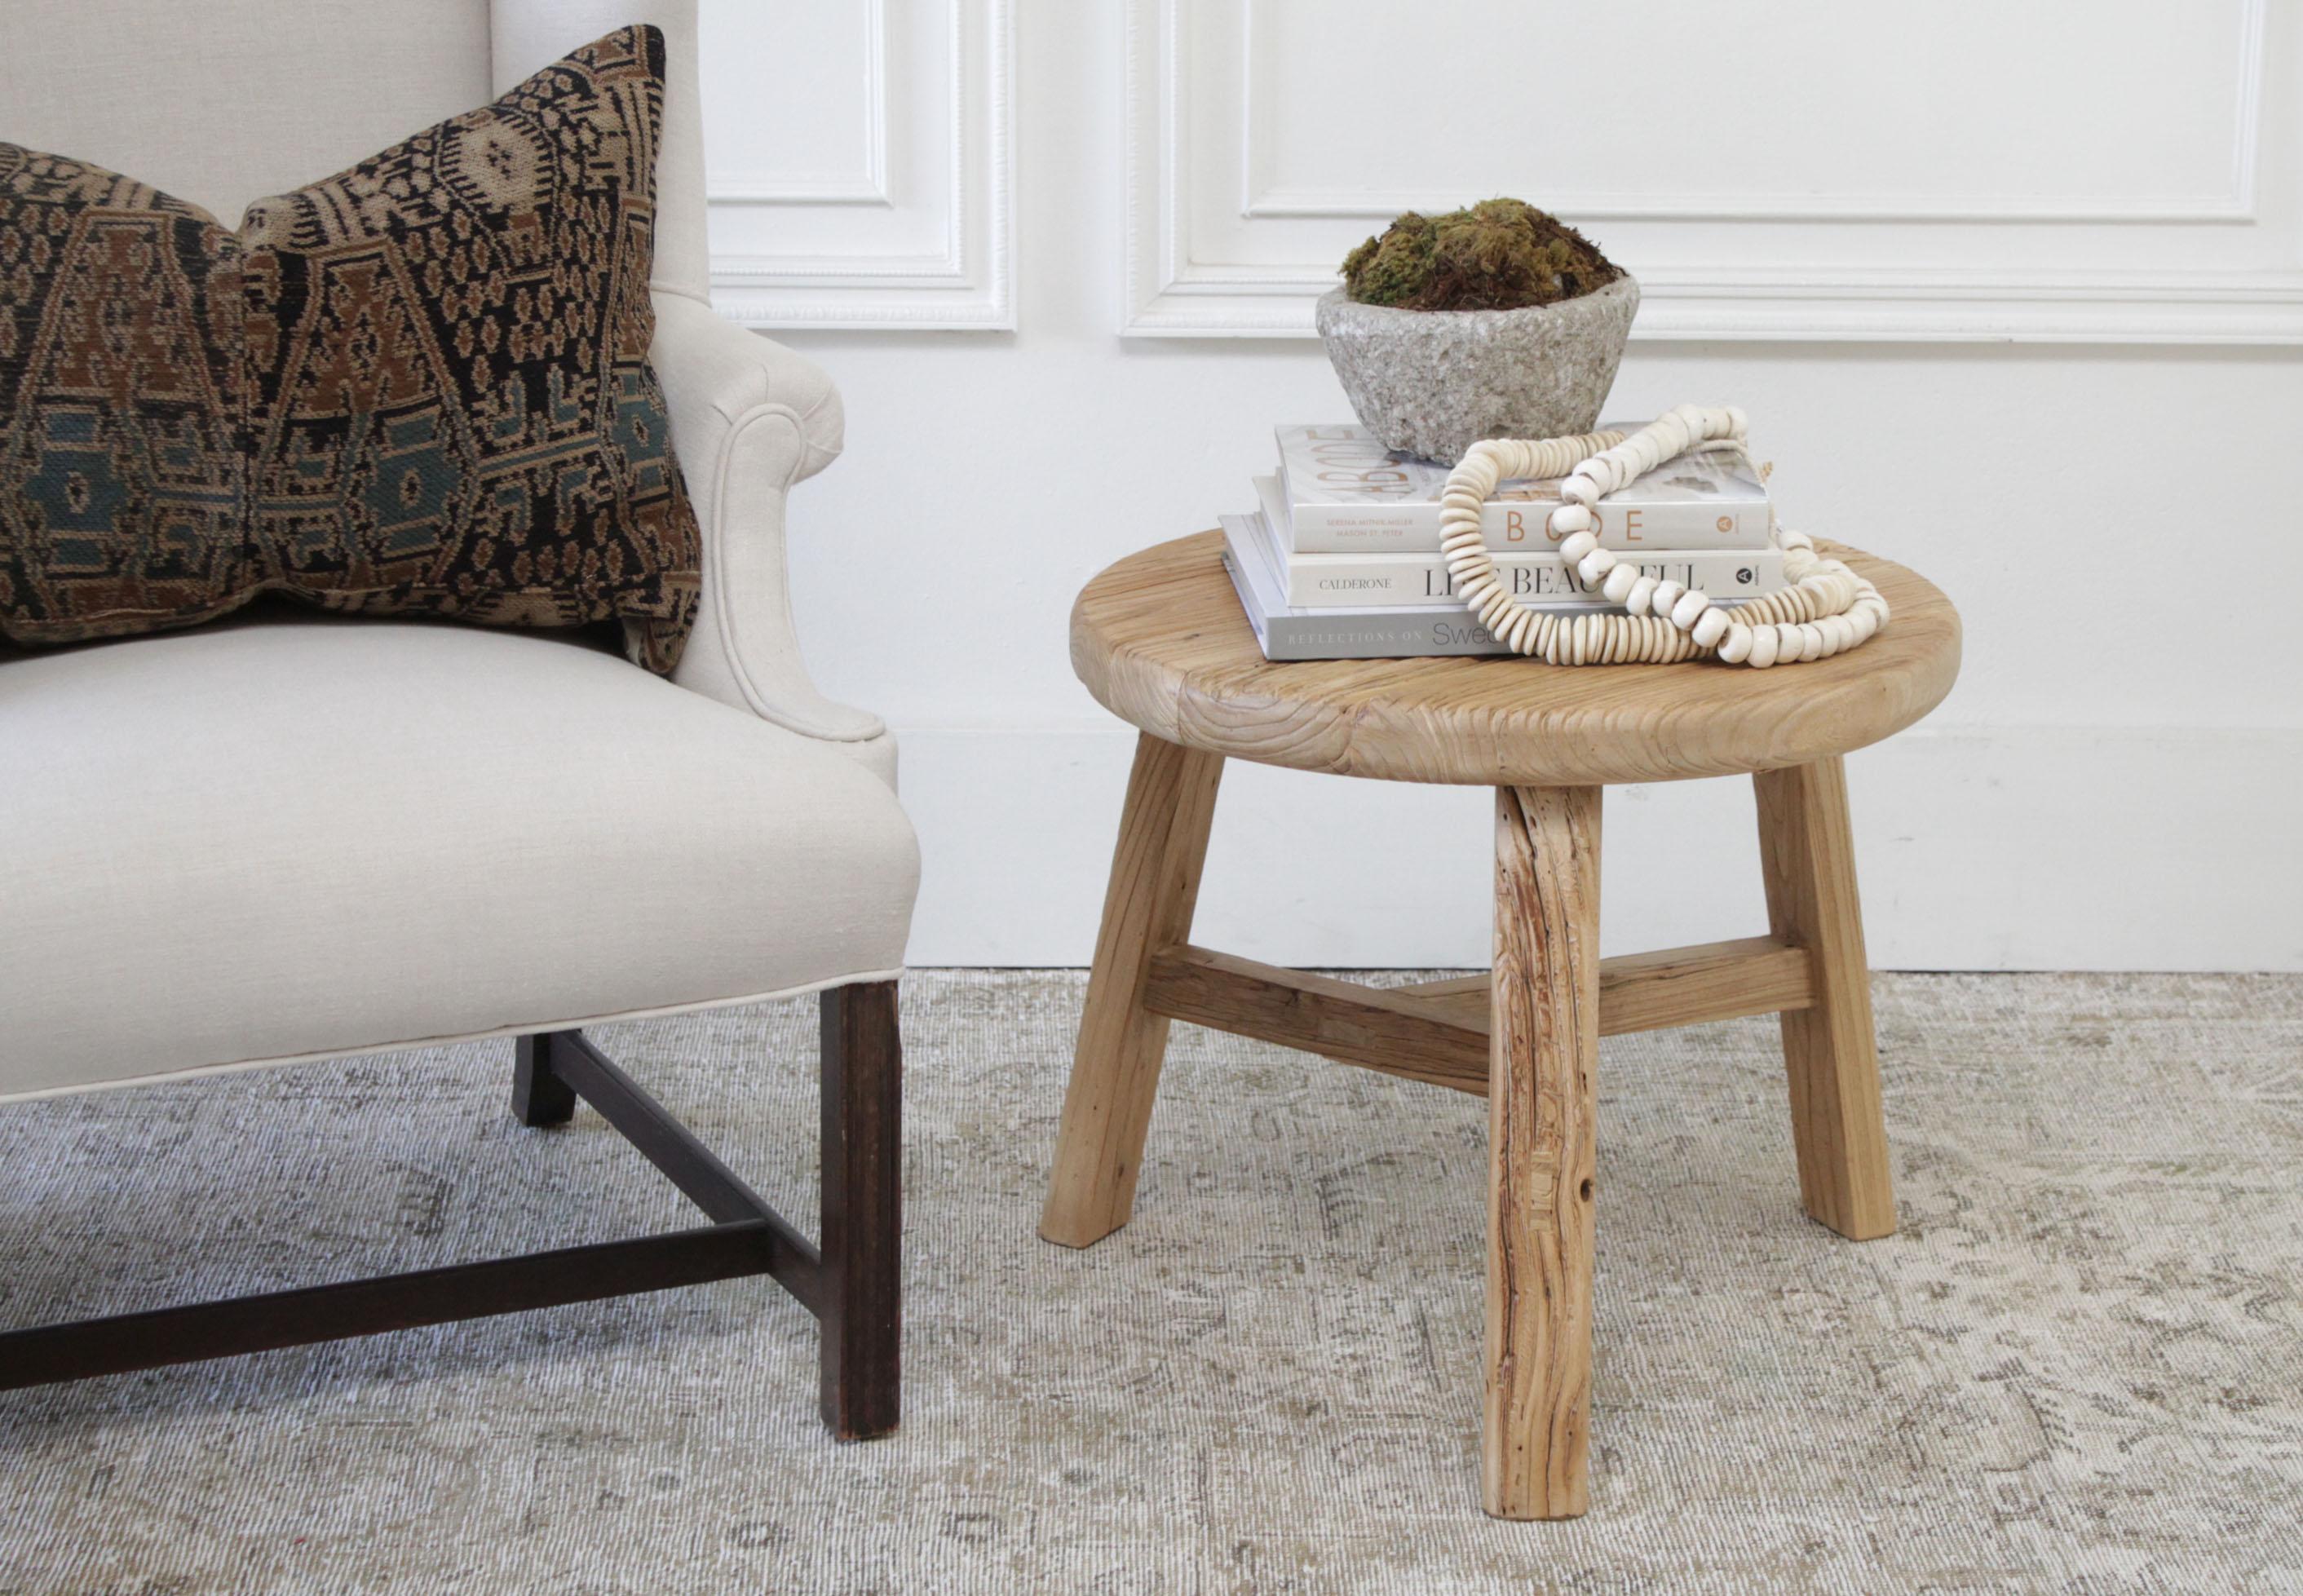 Round natural side table made from reclaimed elmwood
Raw natural finish, a warm honey with gray tones in the wood. Solid and sturdy, a great side table for next to a bed, sofa, chairs.
Size: 21